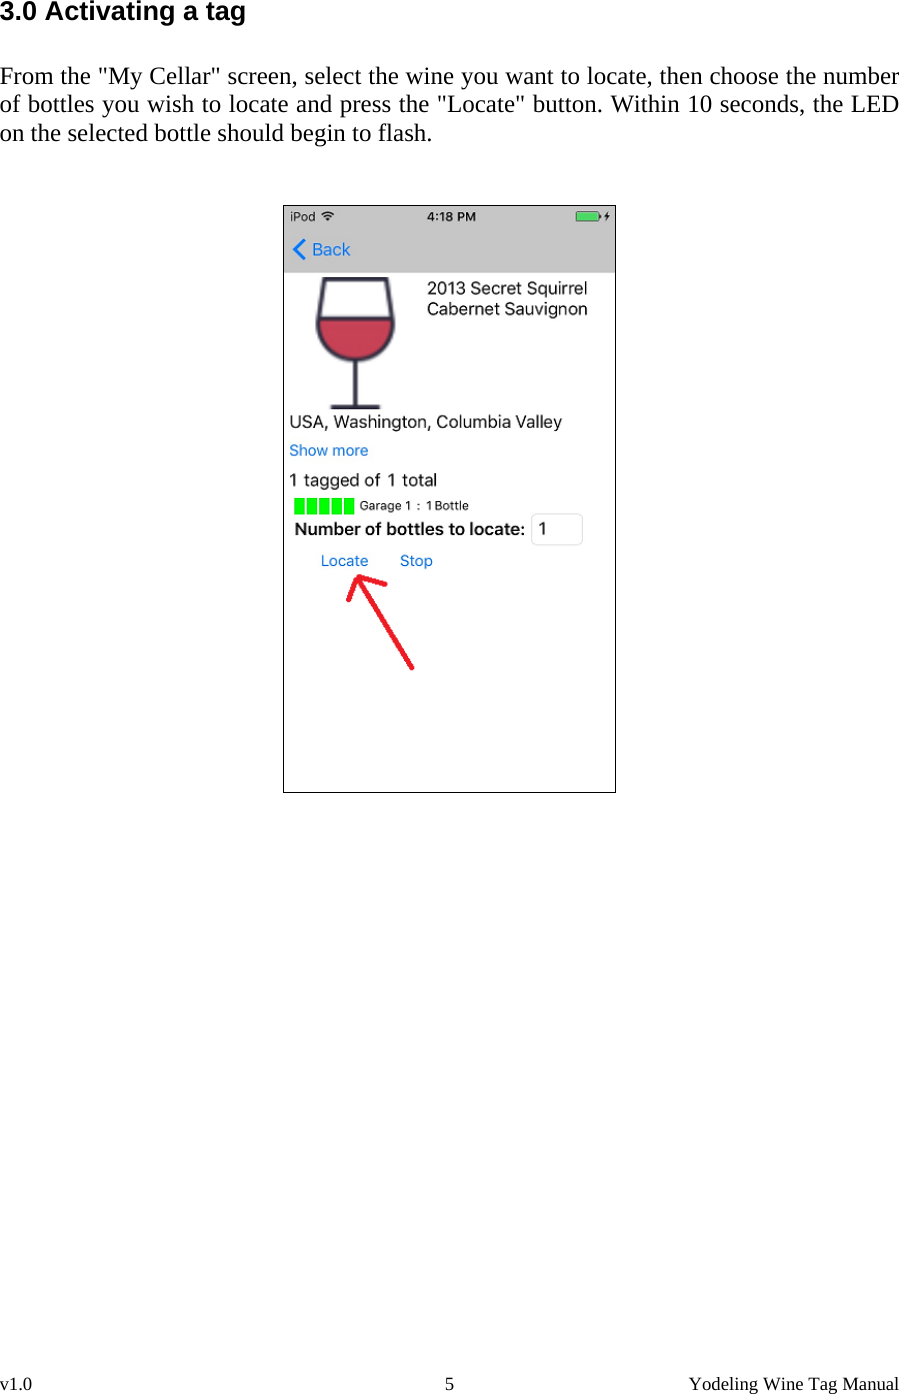 v1.0  5  Yodeling Wine Tag Manual 3.0 Activating a tag  From the &quot;My Cellar&quot; screen, select the wine you want to locate, then choose the number of bottles you wish to locate and press the &quot;Locate&quot; button. Within 10 seconds, the LED on the selected bottle should begin to flash.      